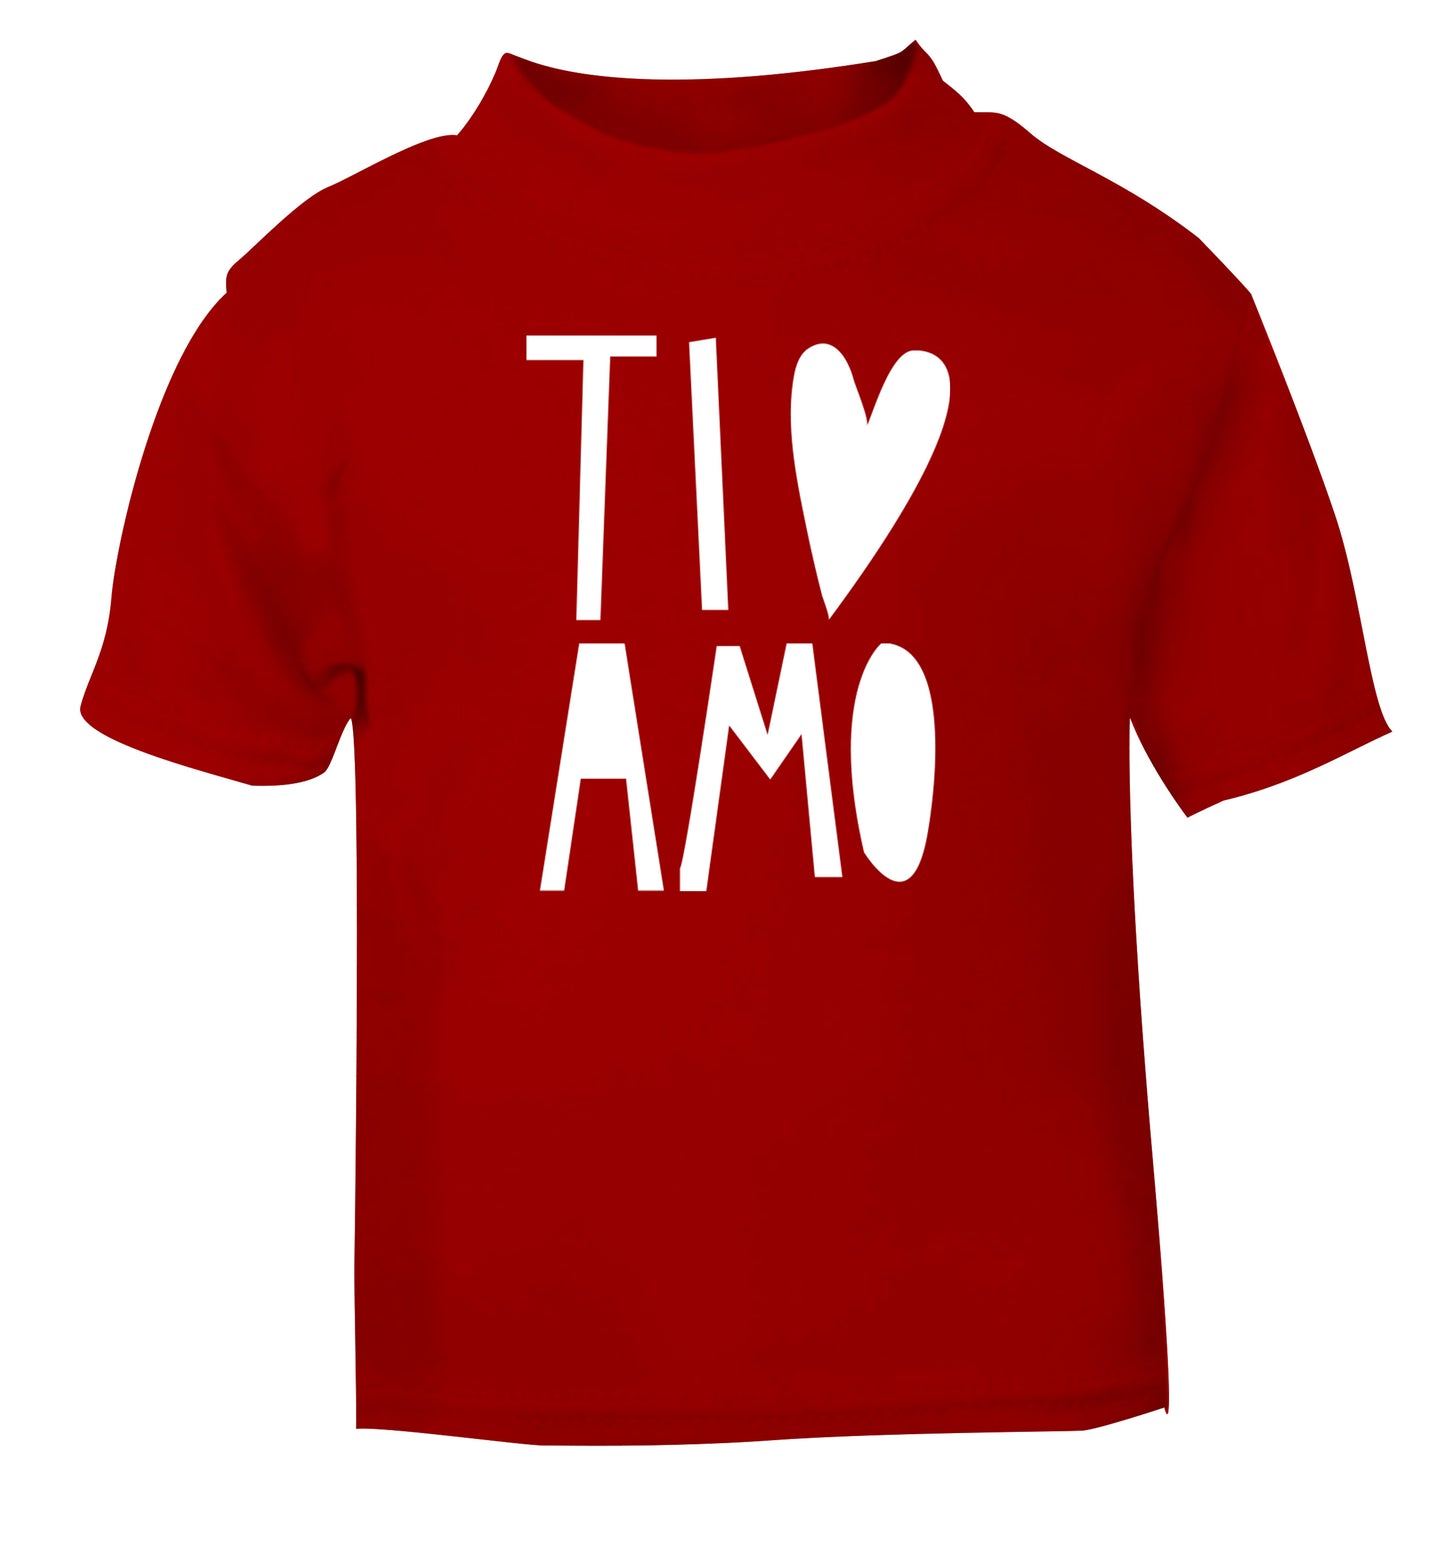 Ti amo - I love you red Baby Toddler Tshirt 2 Years